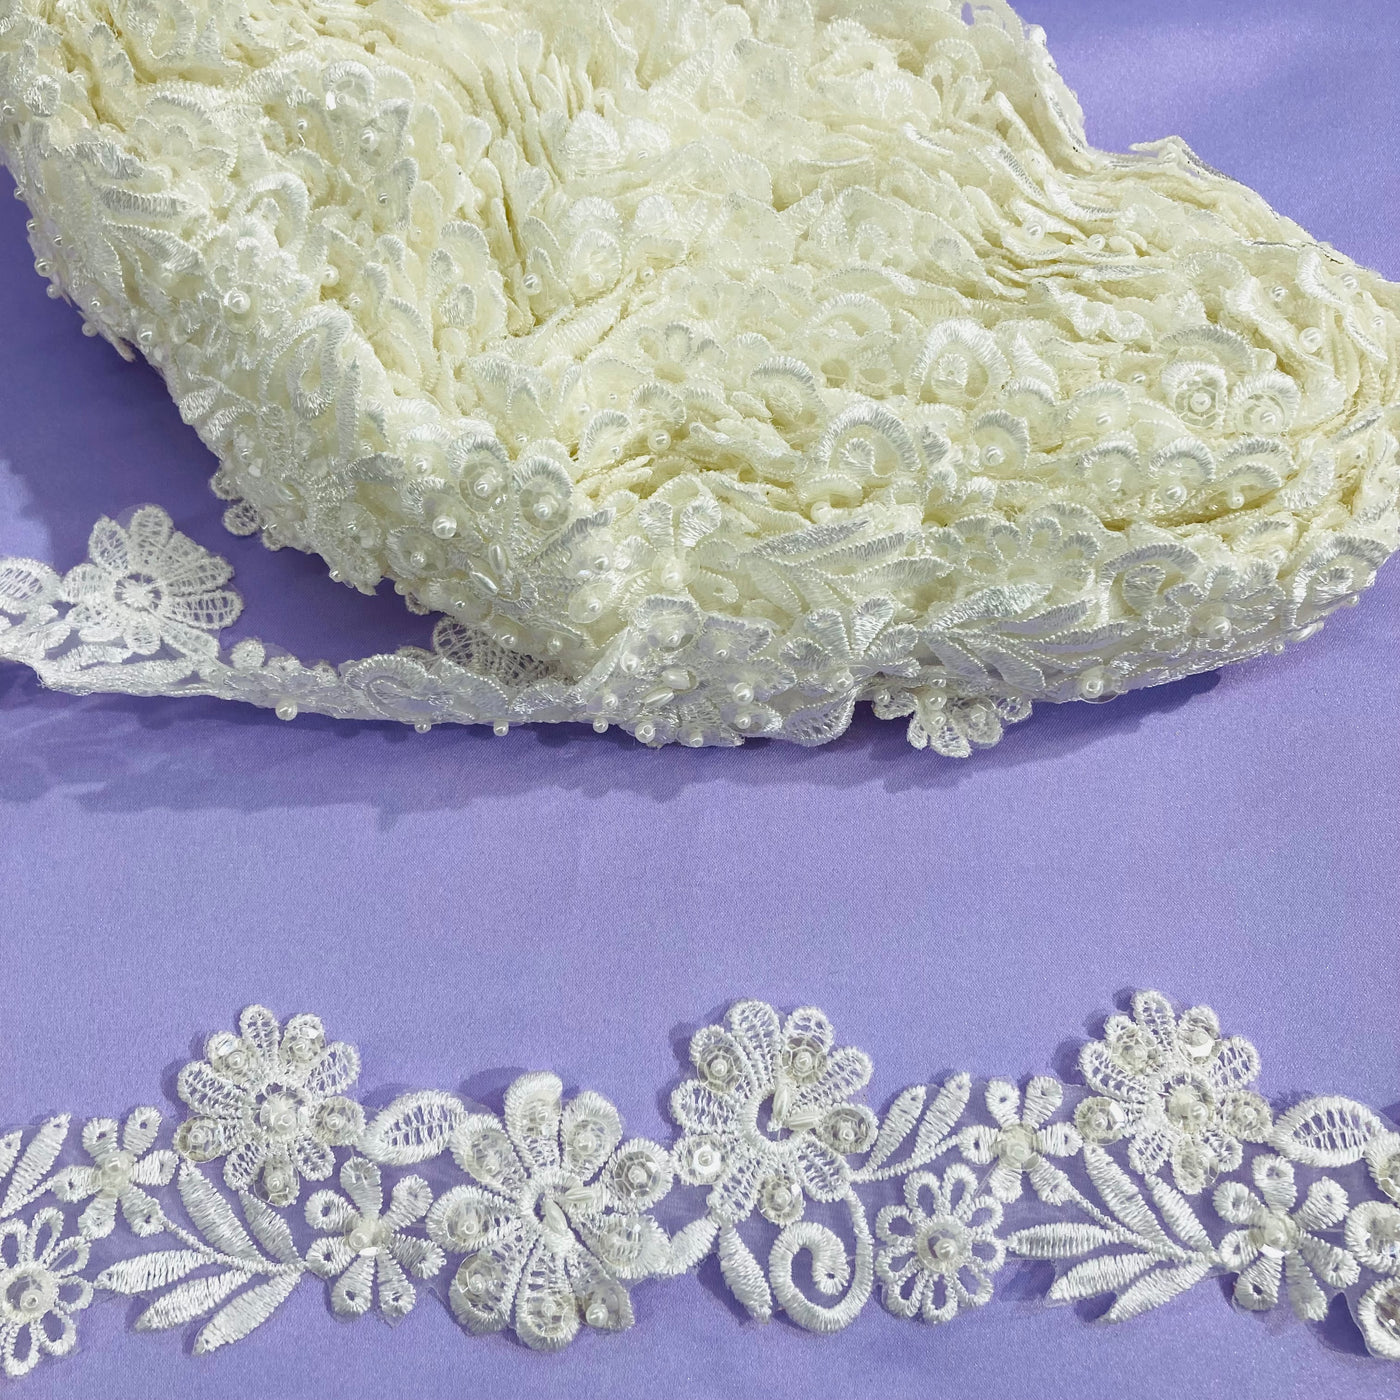 Beaded Lace Trimming Embroidered on Poly Organza. Lace USA